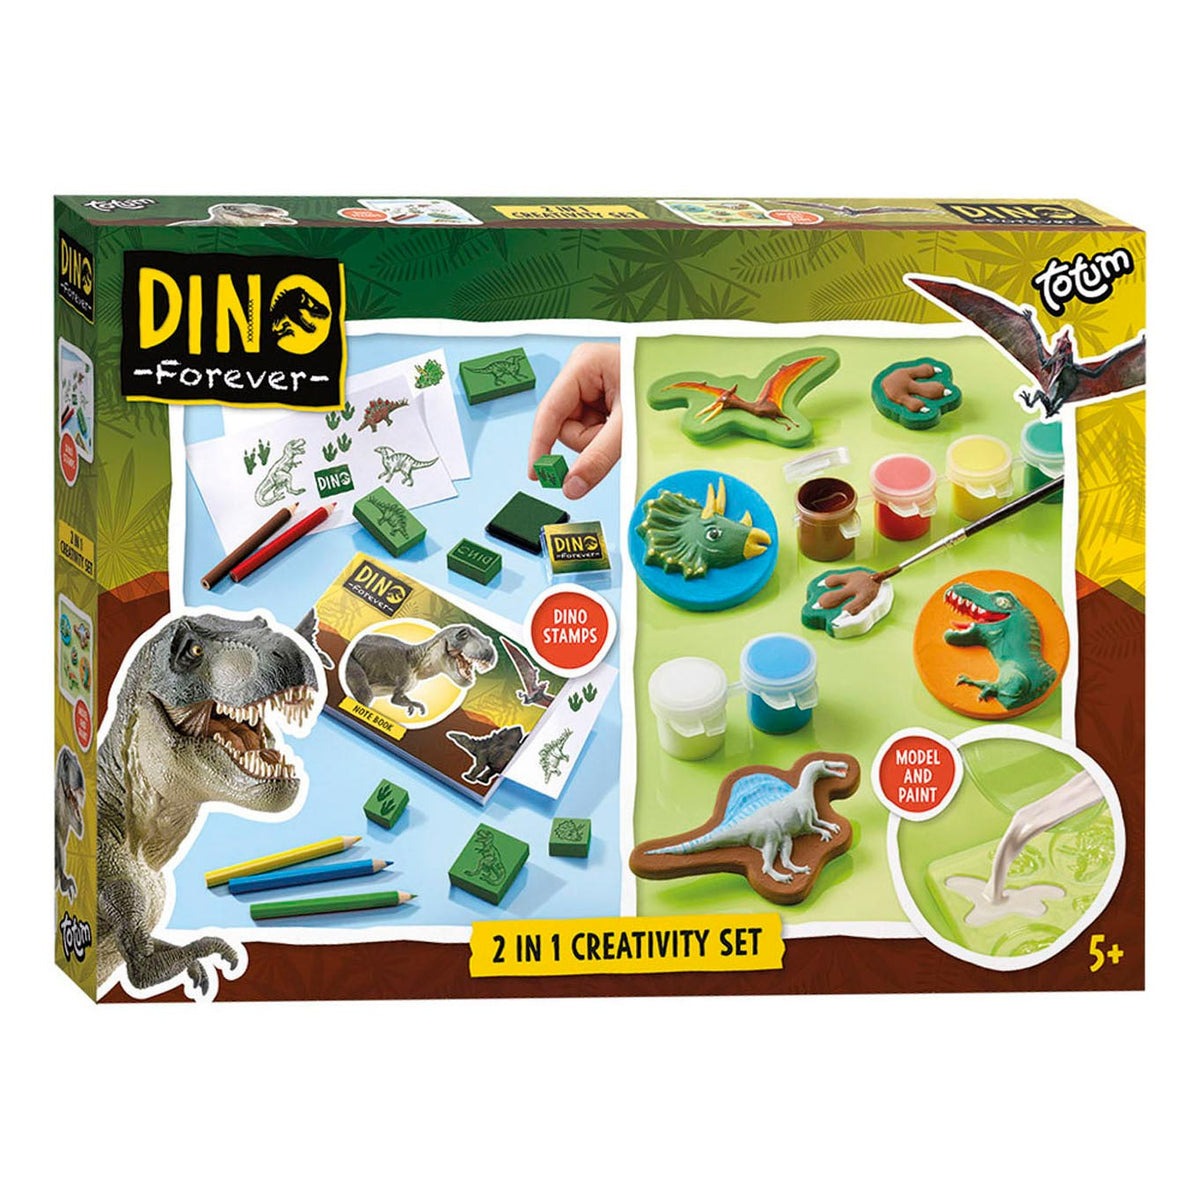 Totum Dino Forever - 2in1 Plaster and Color Creativity Set